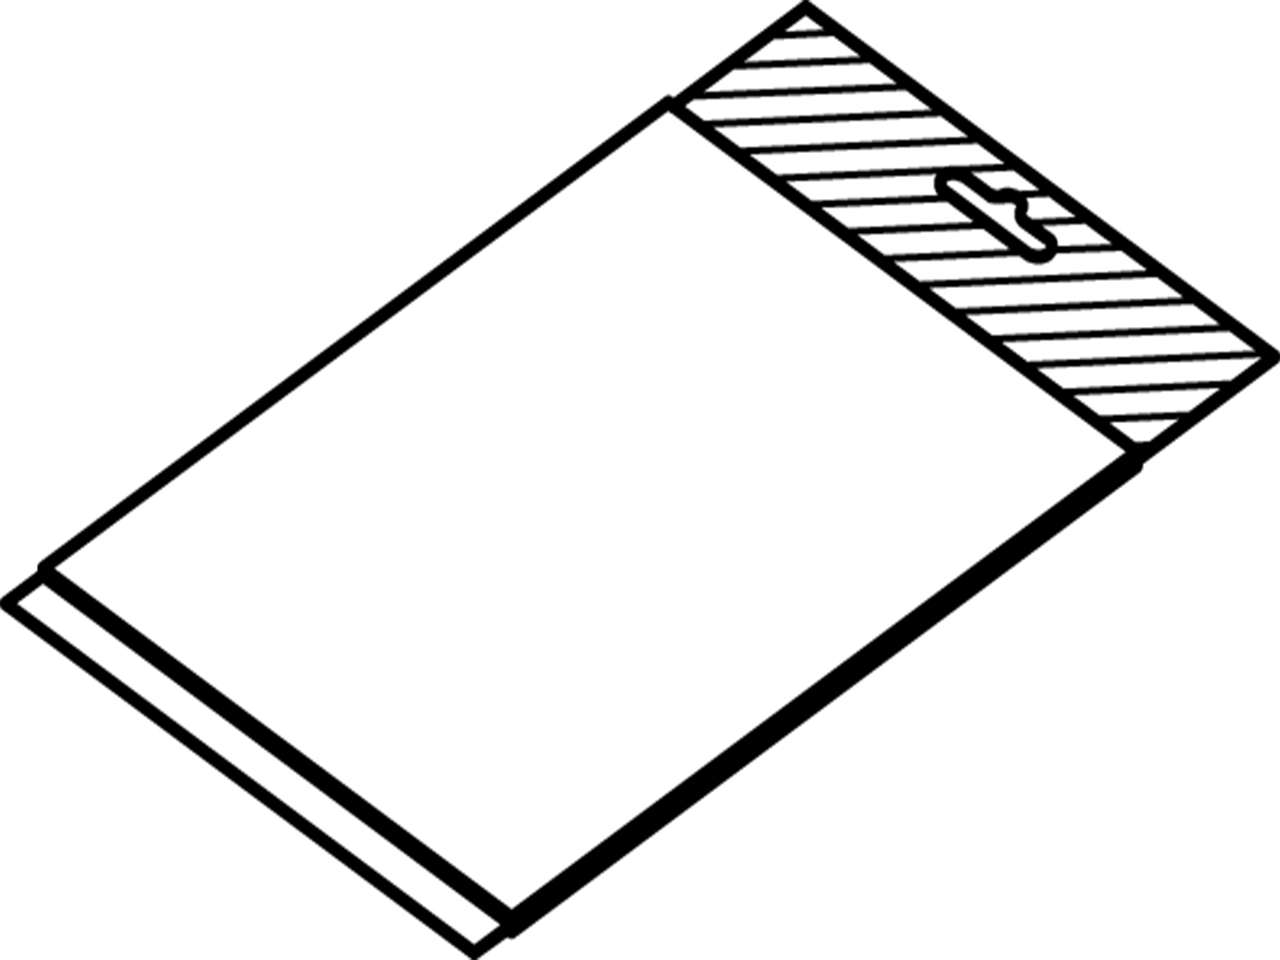 Illustration of the packaging type "Hang pack with reinforced header"